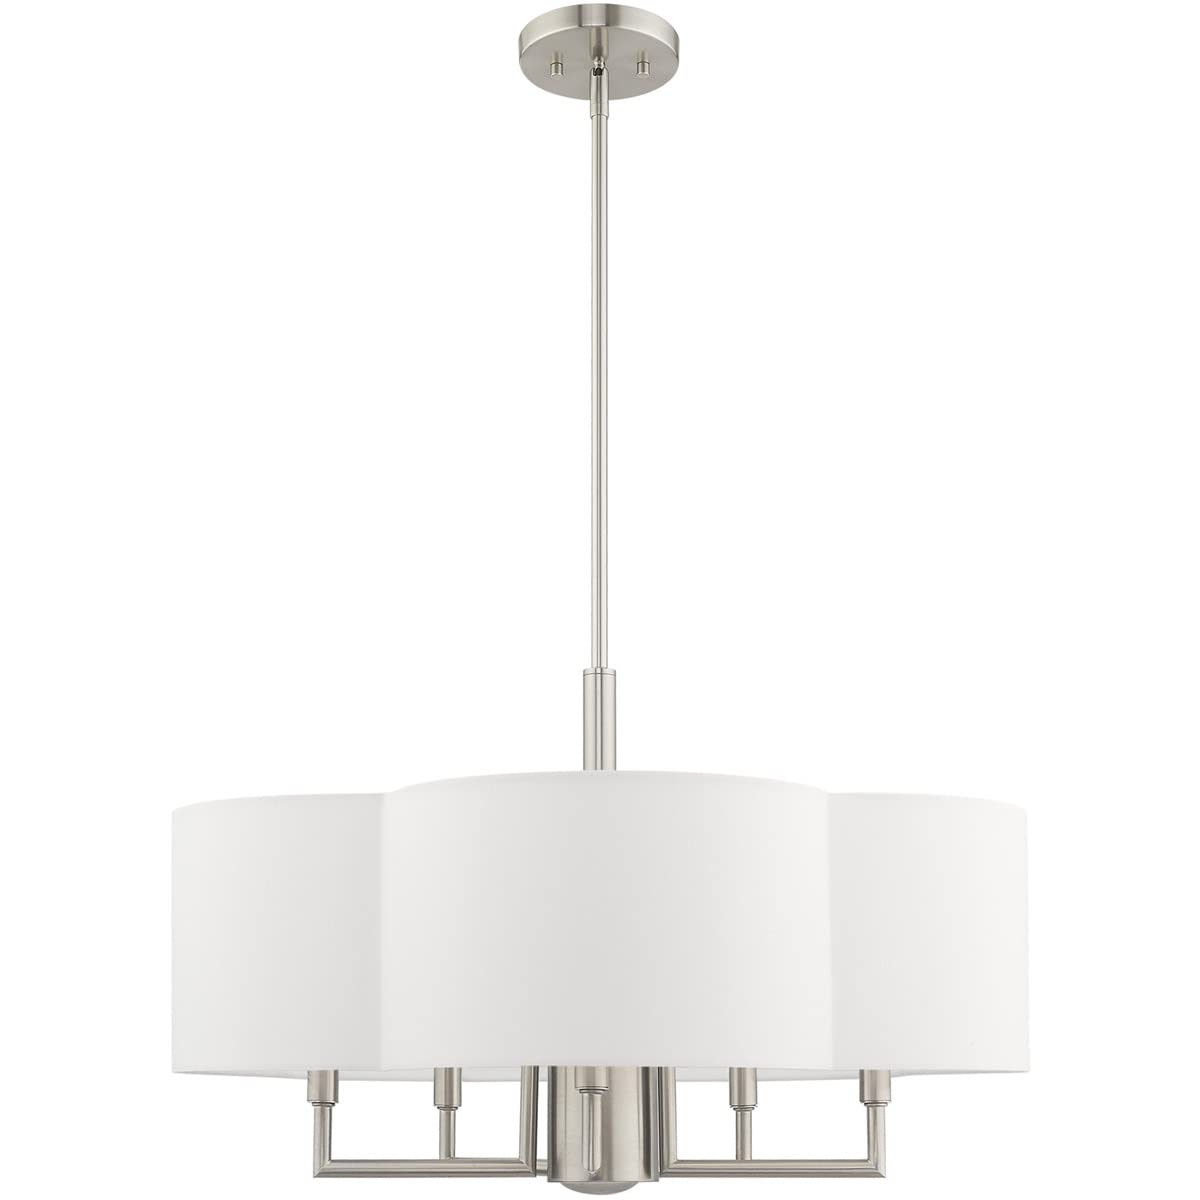 Livex Lighting 51925-91 Chelsea - Six Light Chandelier, Brushed Nickel Finish with Off-White Fabric Shade